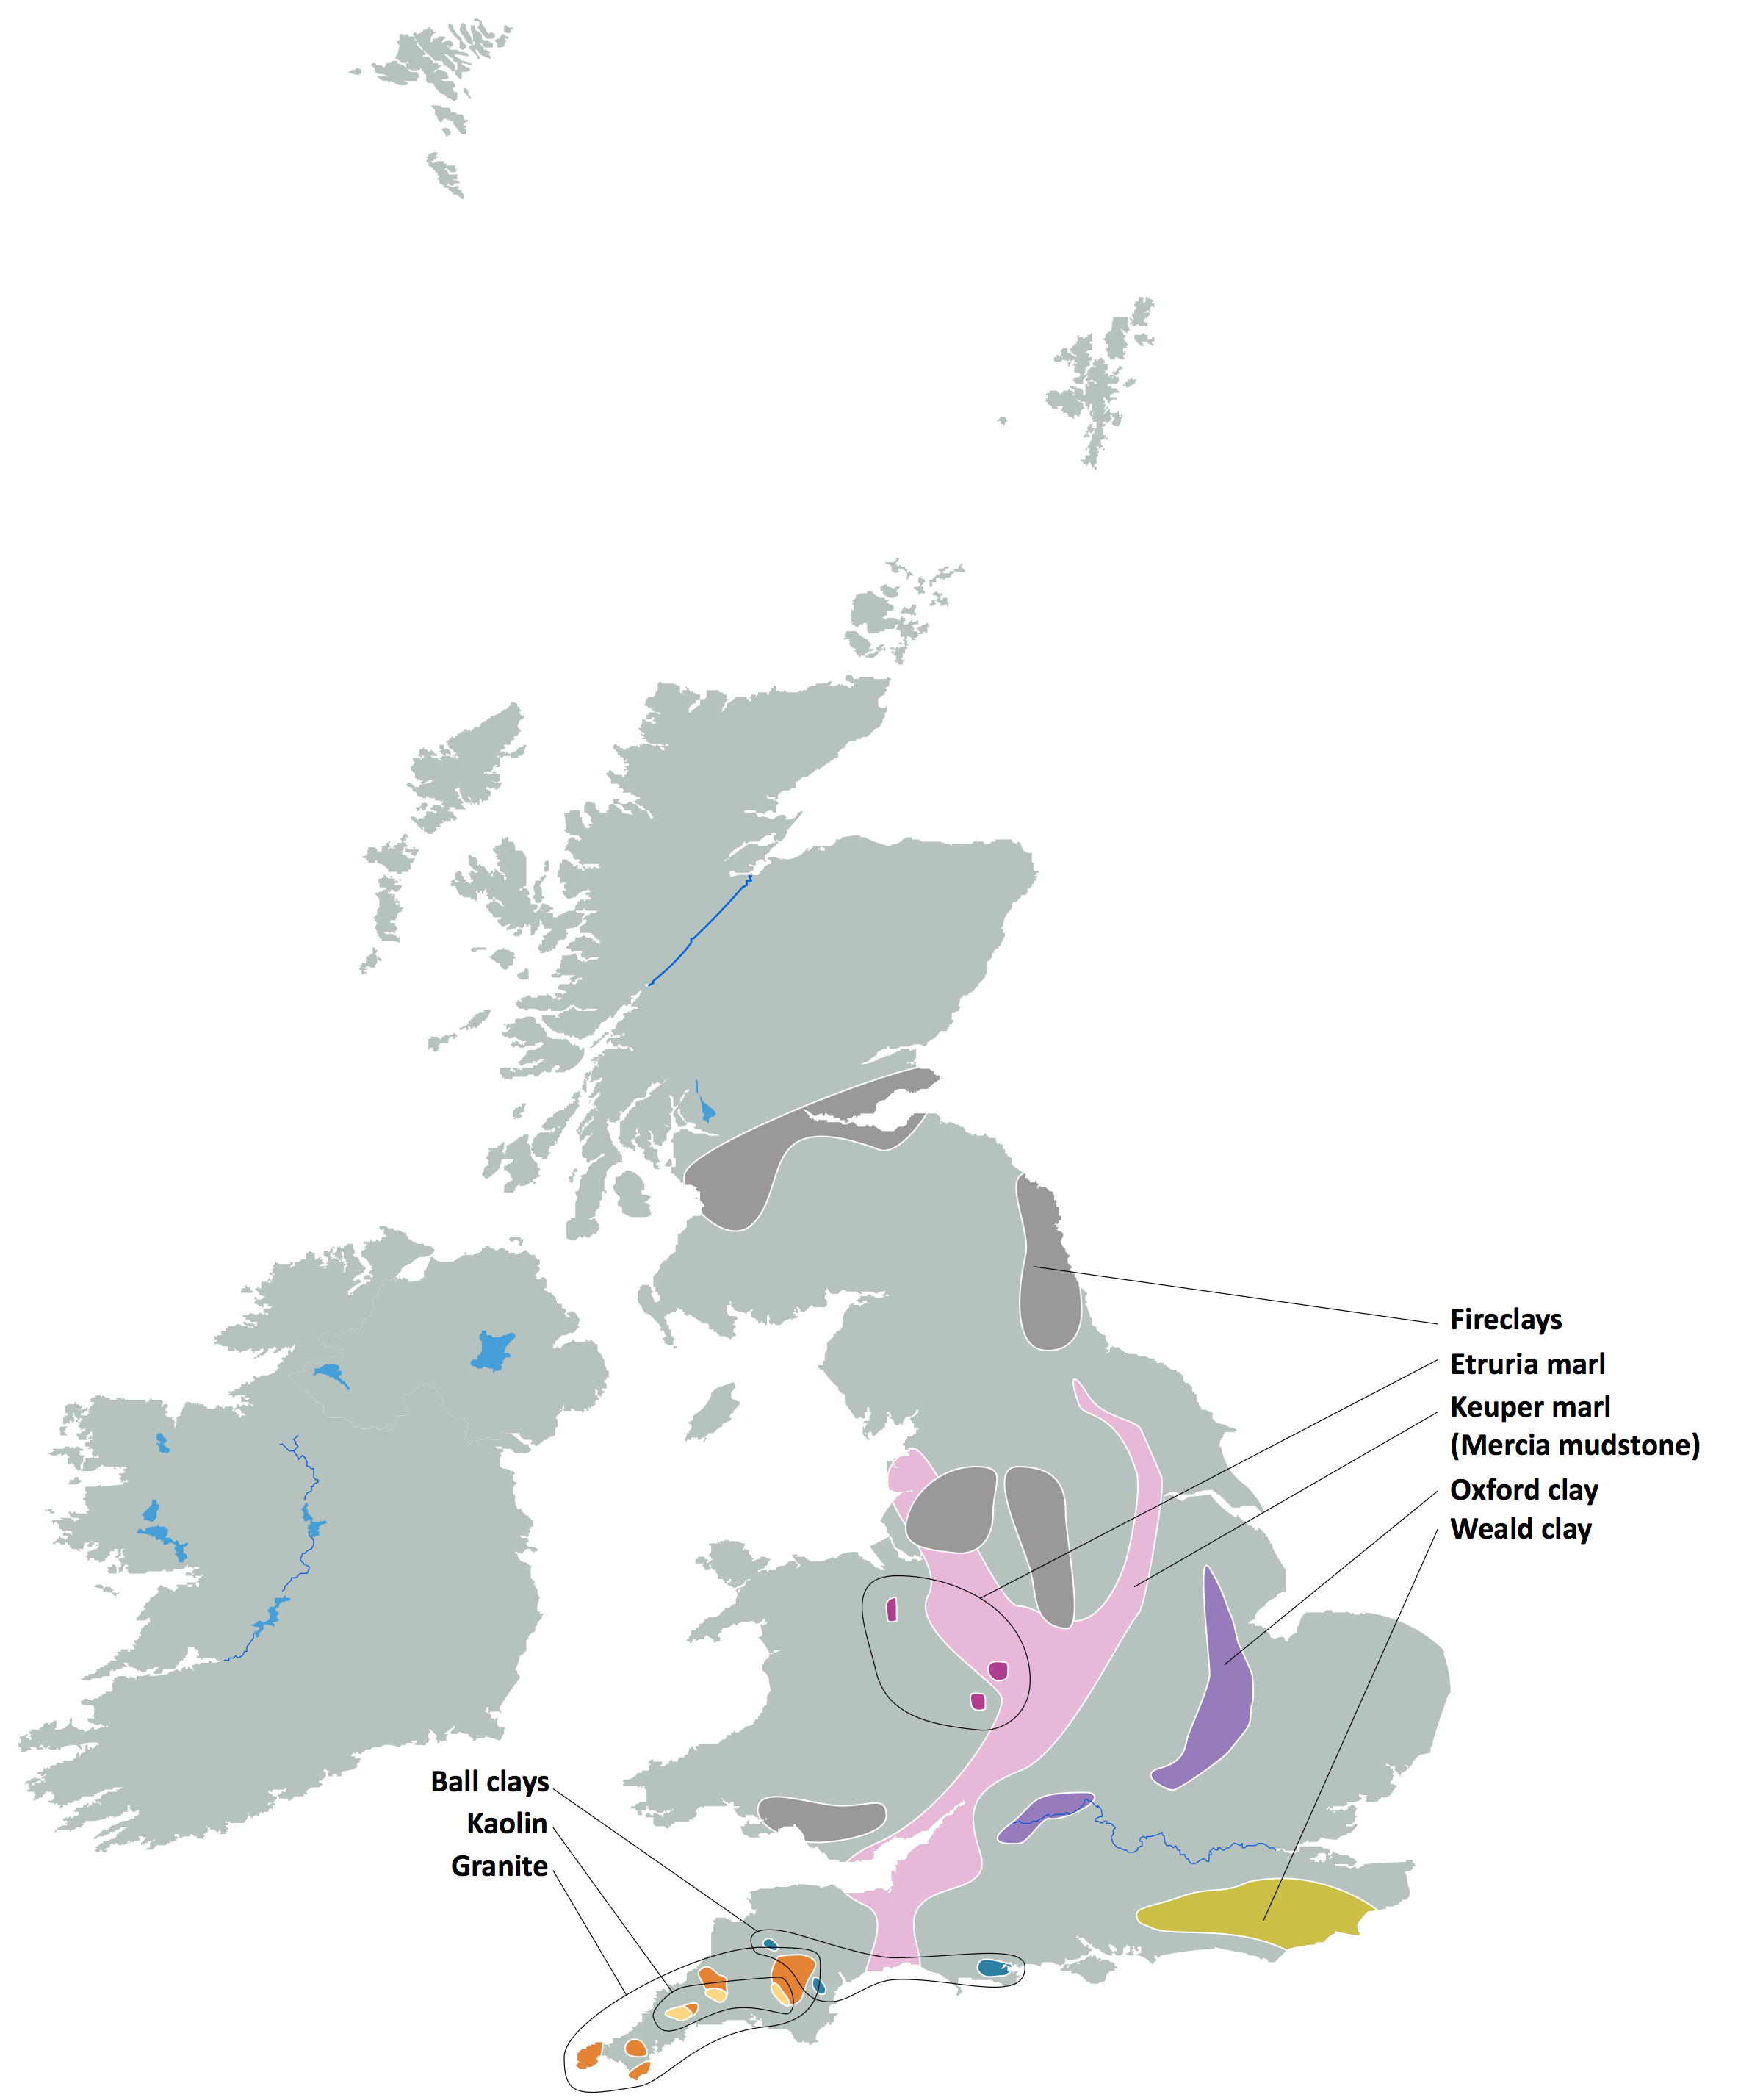 Map of clay deposits in UK